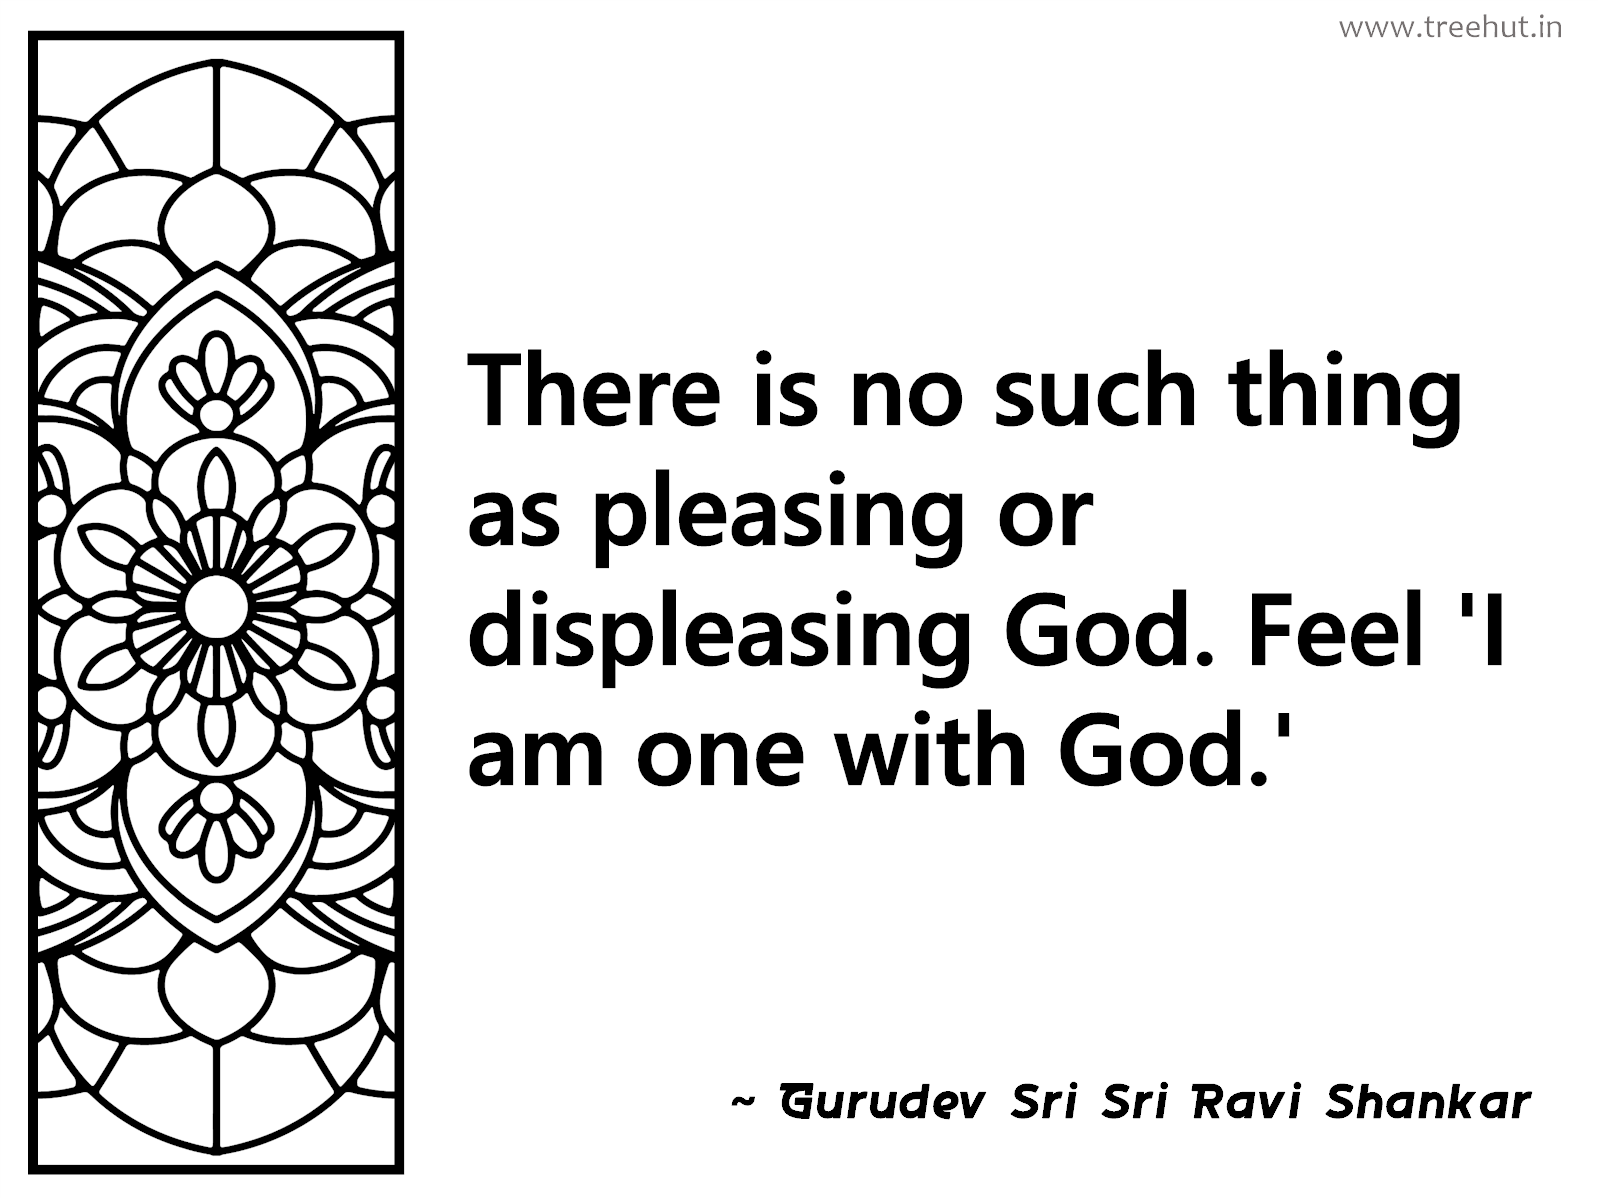 There is no such thing as pleasing or displeasing God. Feel 'I am one with God.' Inspirational Quote by Gurudev Sri Sri Ravi Shankar, coloring pages